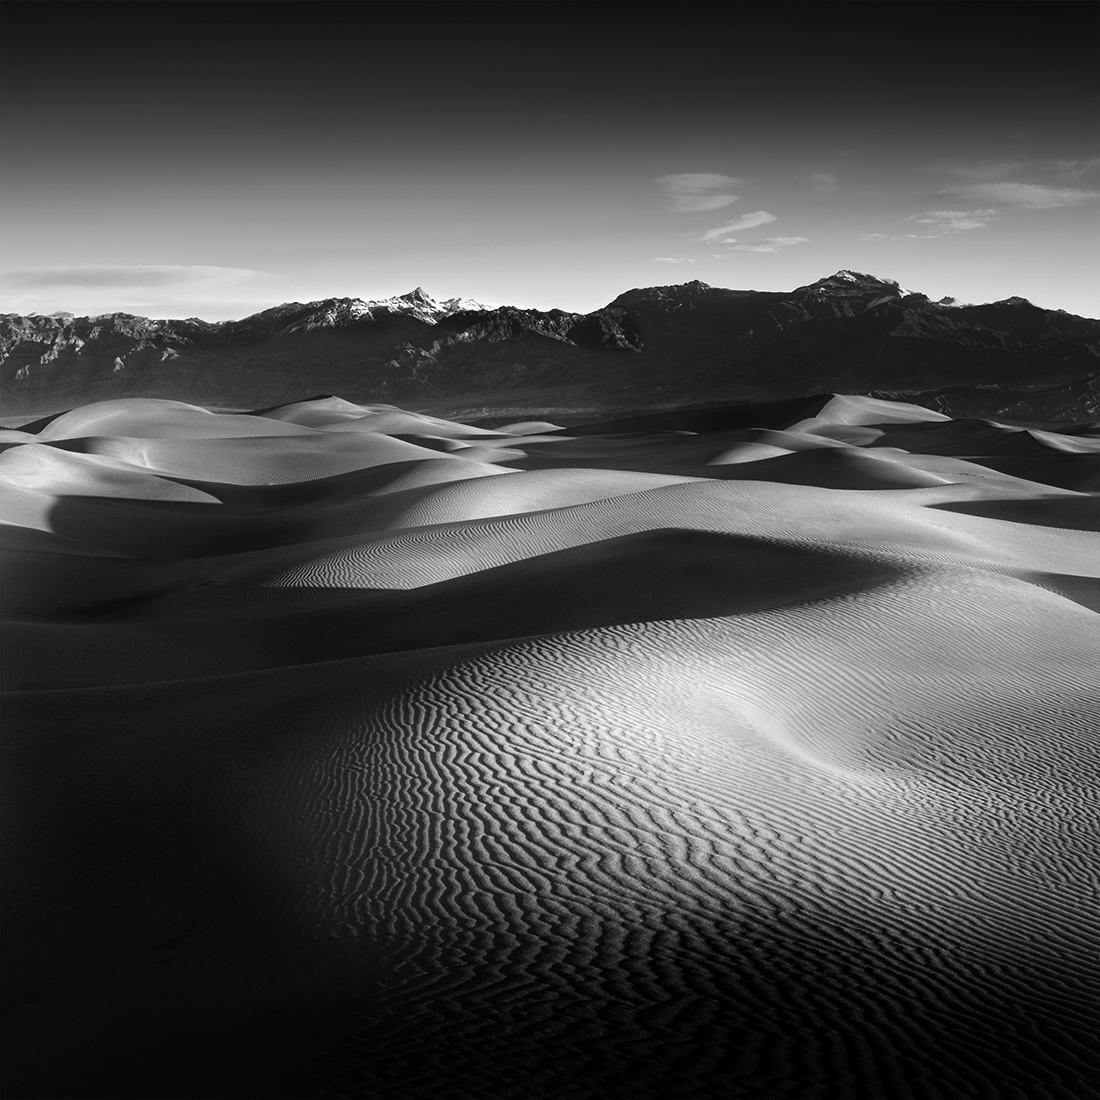 Sunrise at the Mesquite Dunes, Death Valley National Park, United States